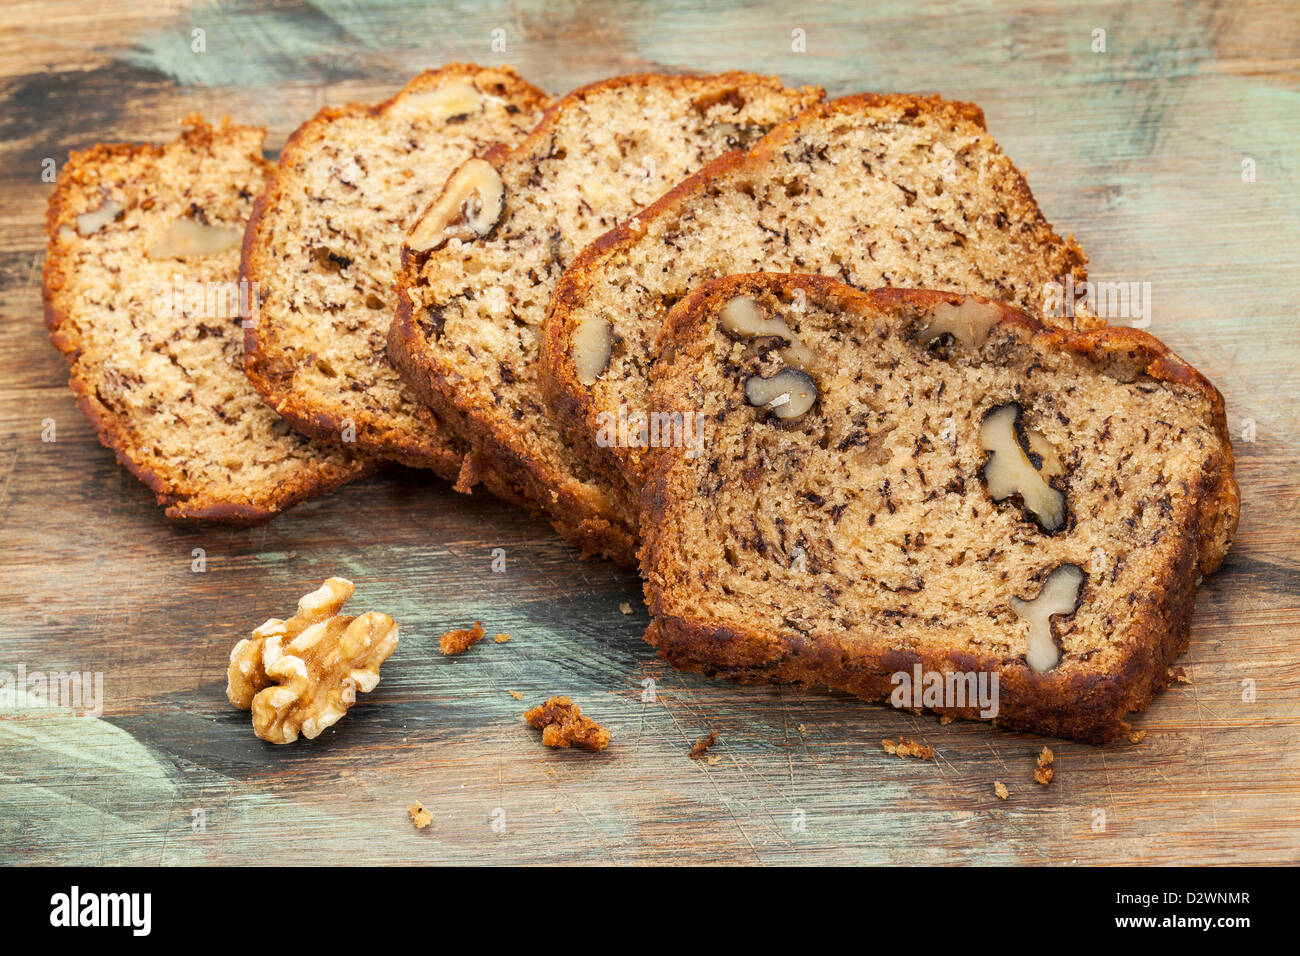 slices of fresh banana bread with walnut on a cutting board Stock Photo